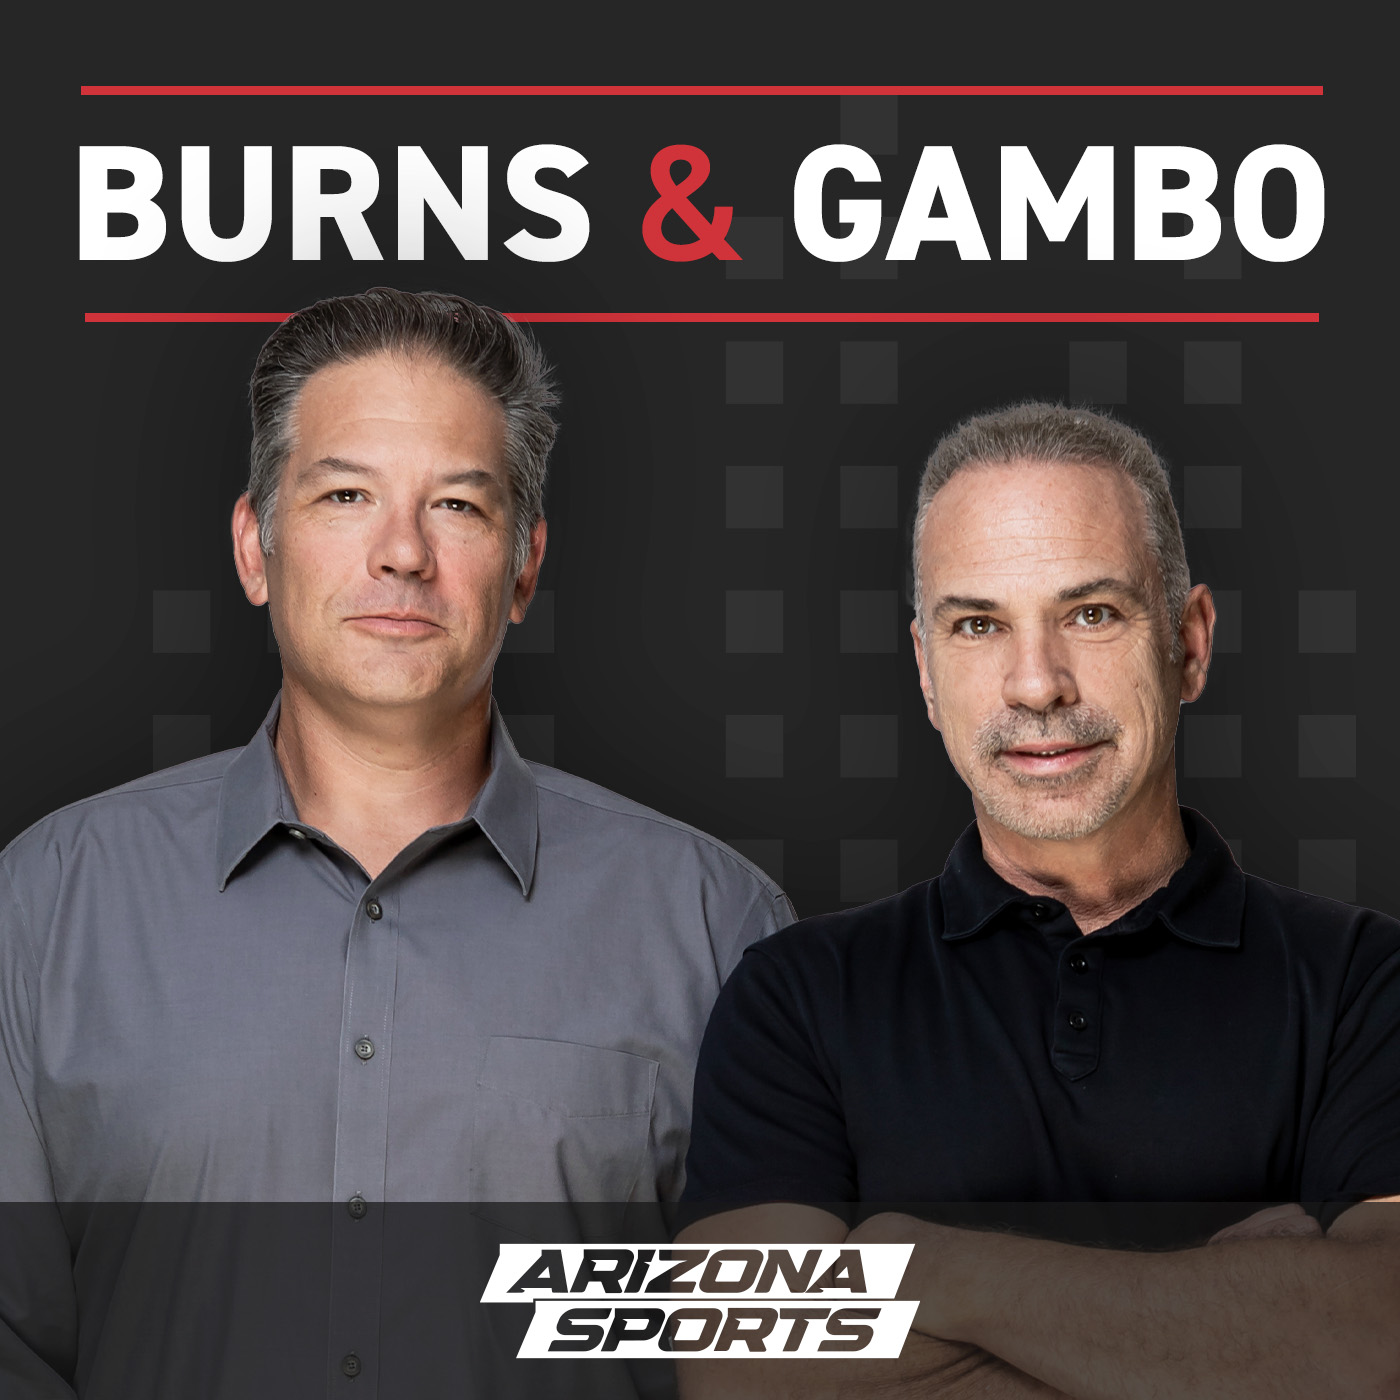 Burns & Gambo discuss how the Trevon Diggs injury impacts Sunday matchup against the Arizona Cardinals (Hour 2)